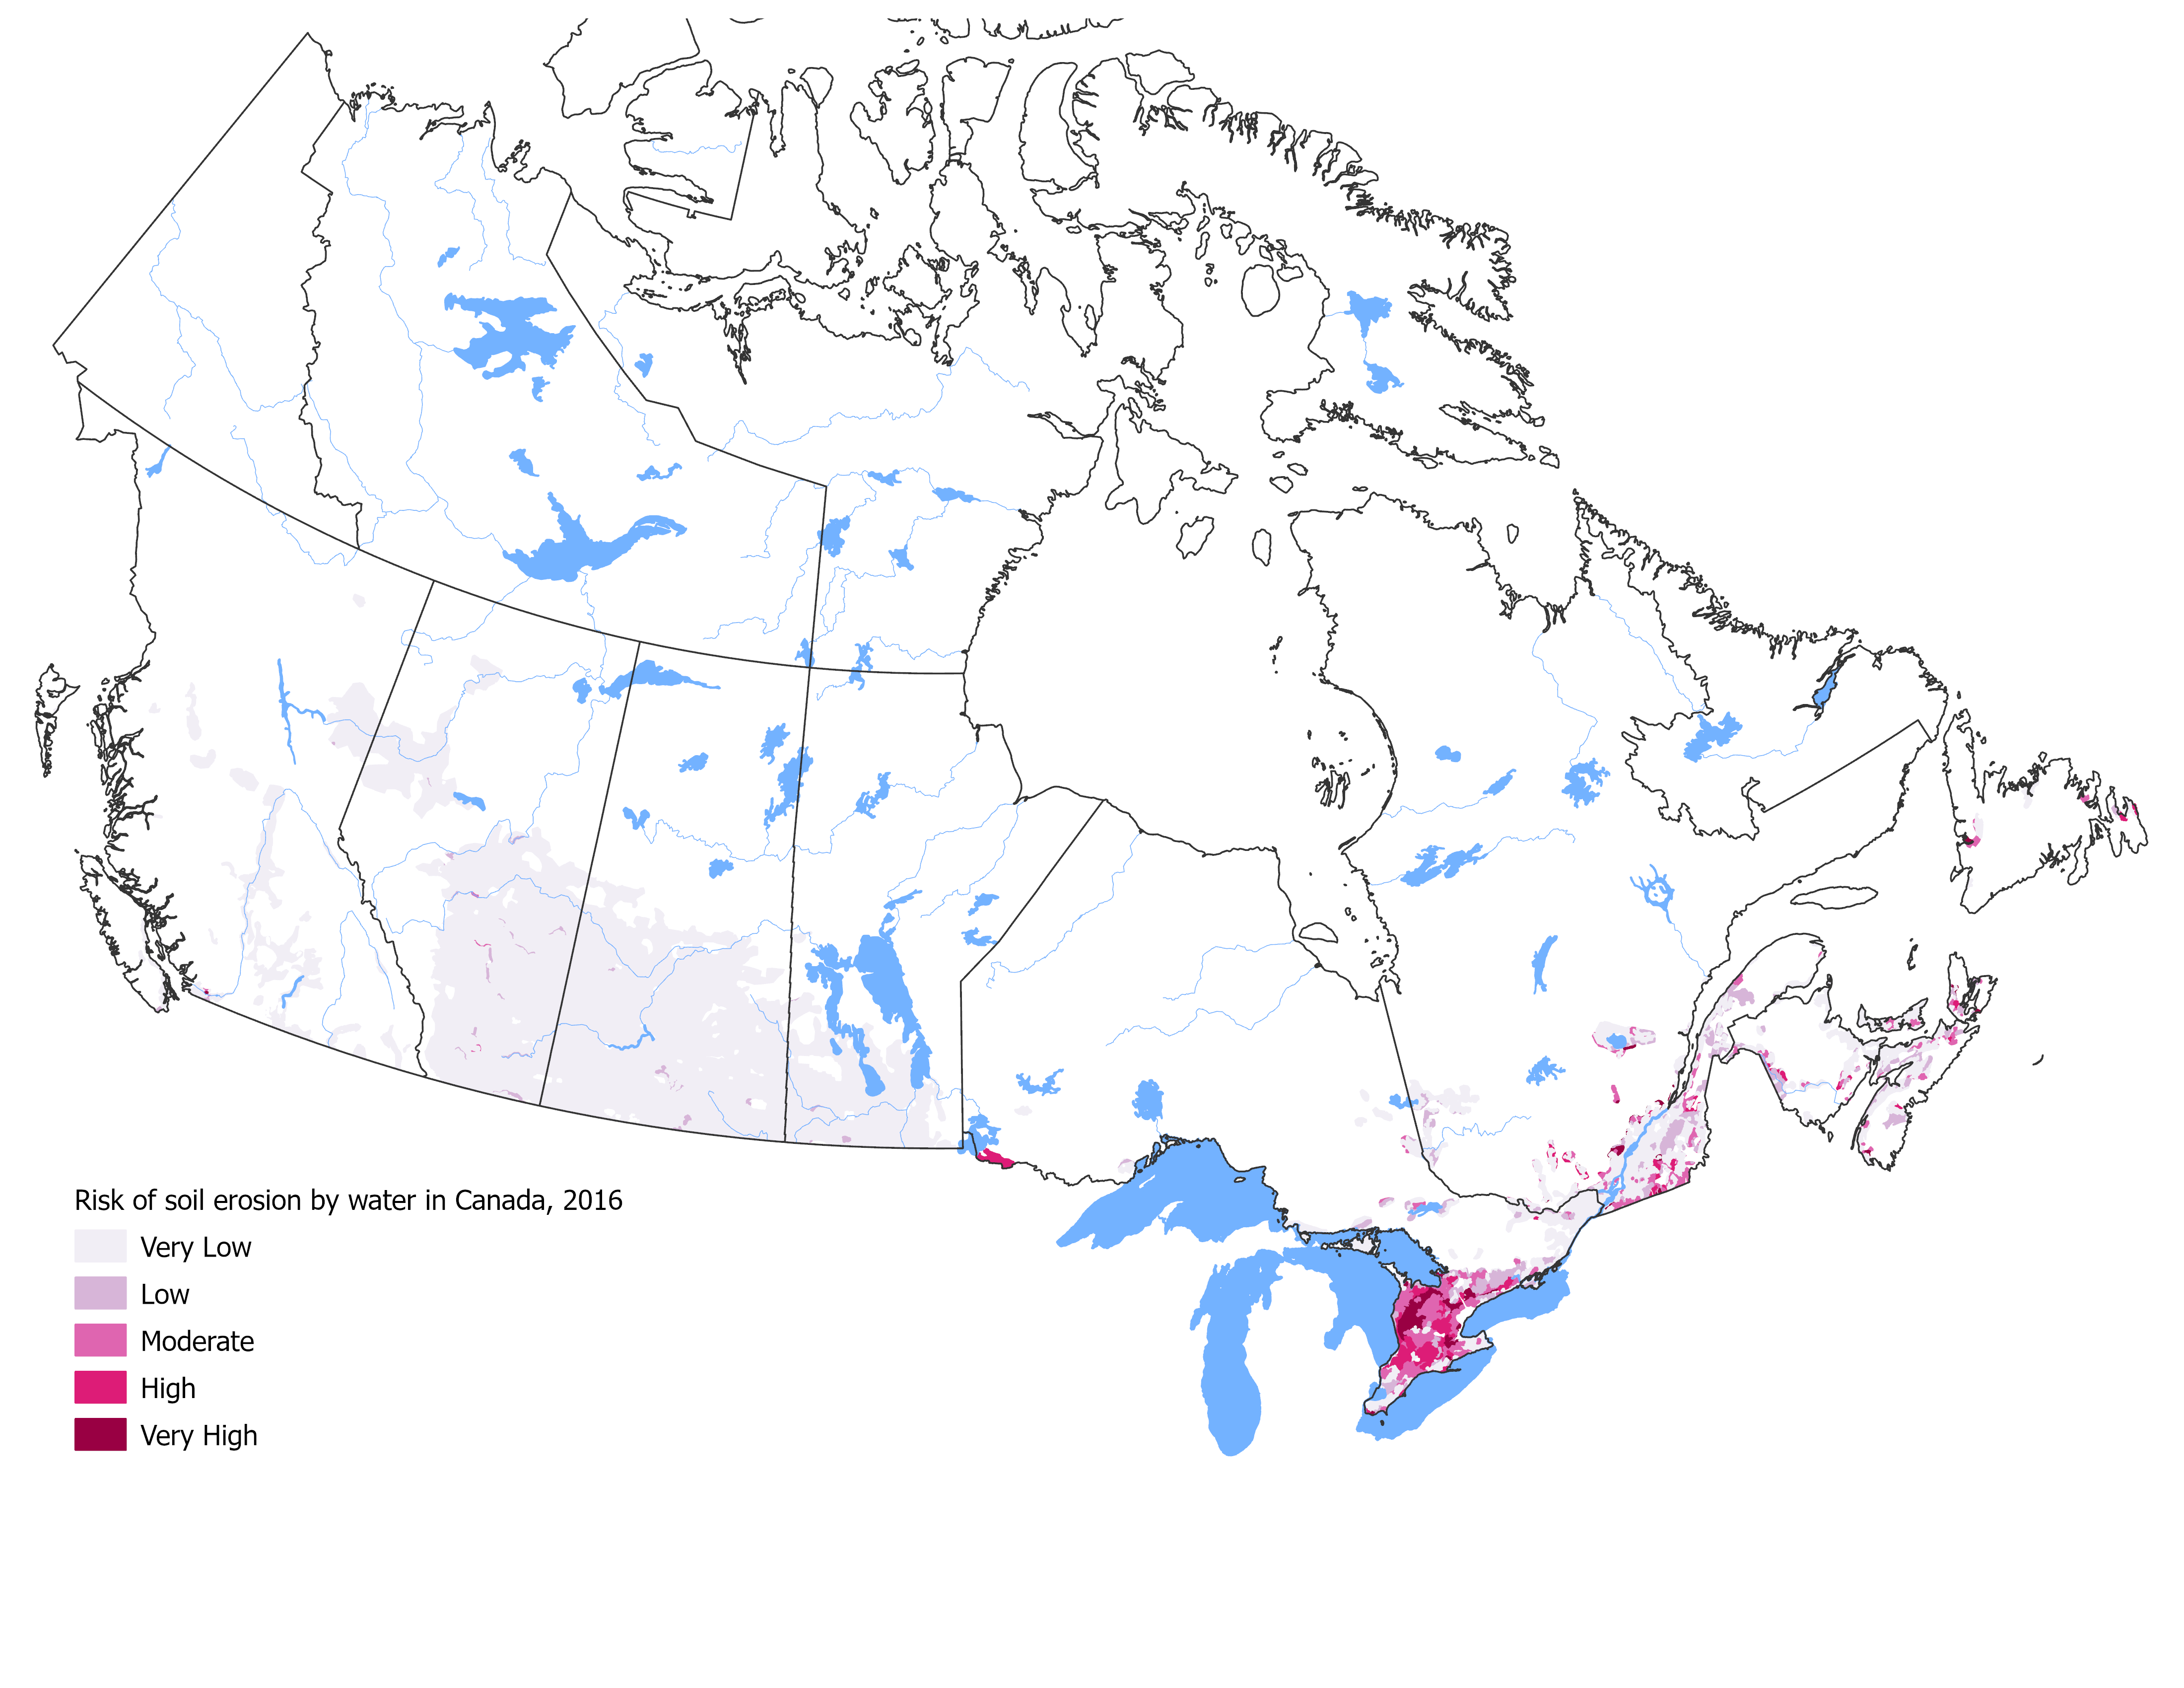 Figure 3 illustrates the risk of soil erosion from the individual water component across Canada in 2016, color coded based on the risk level.